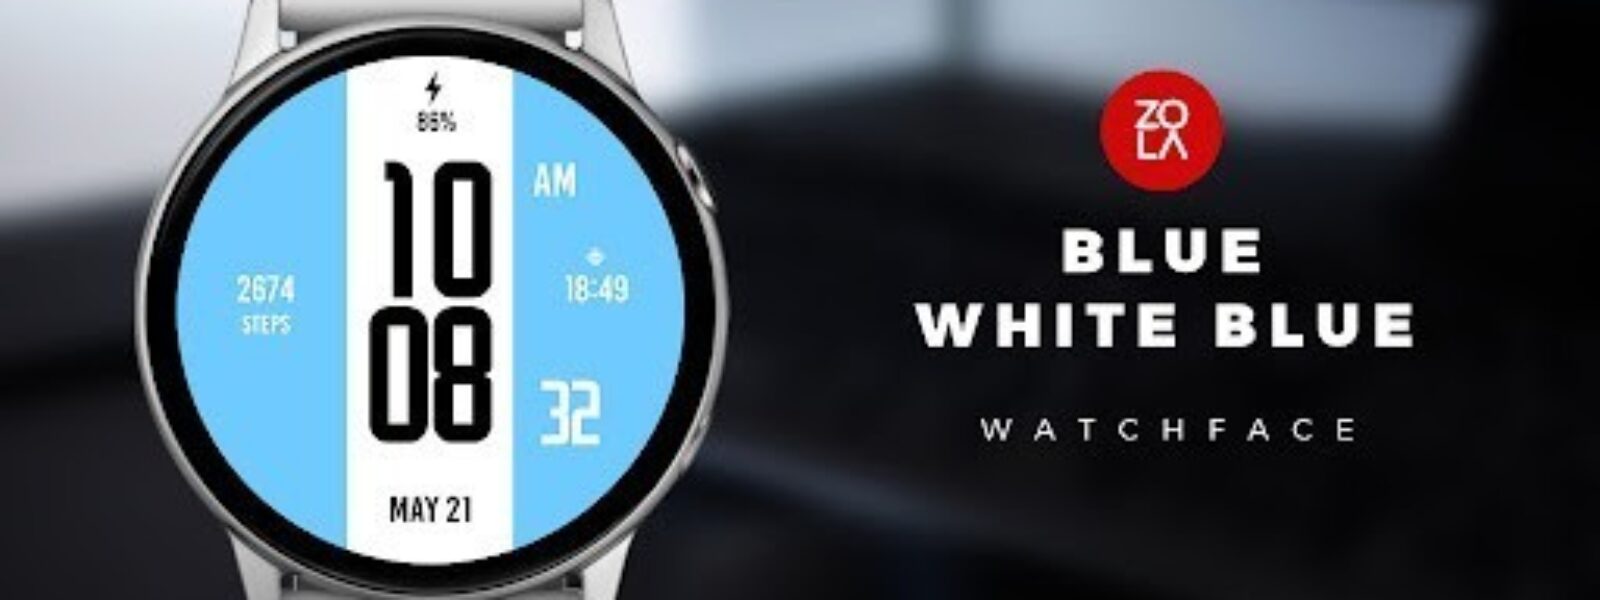 Blue White Blue Watch Face pentru Android | iOS